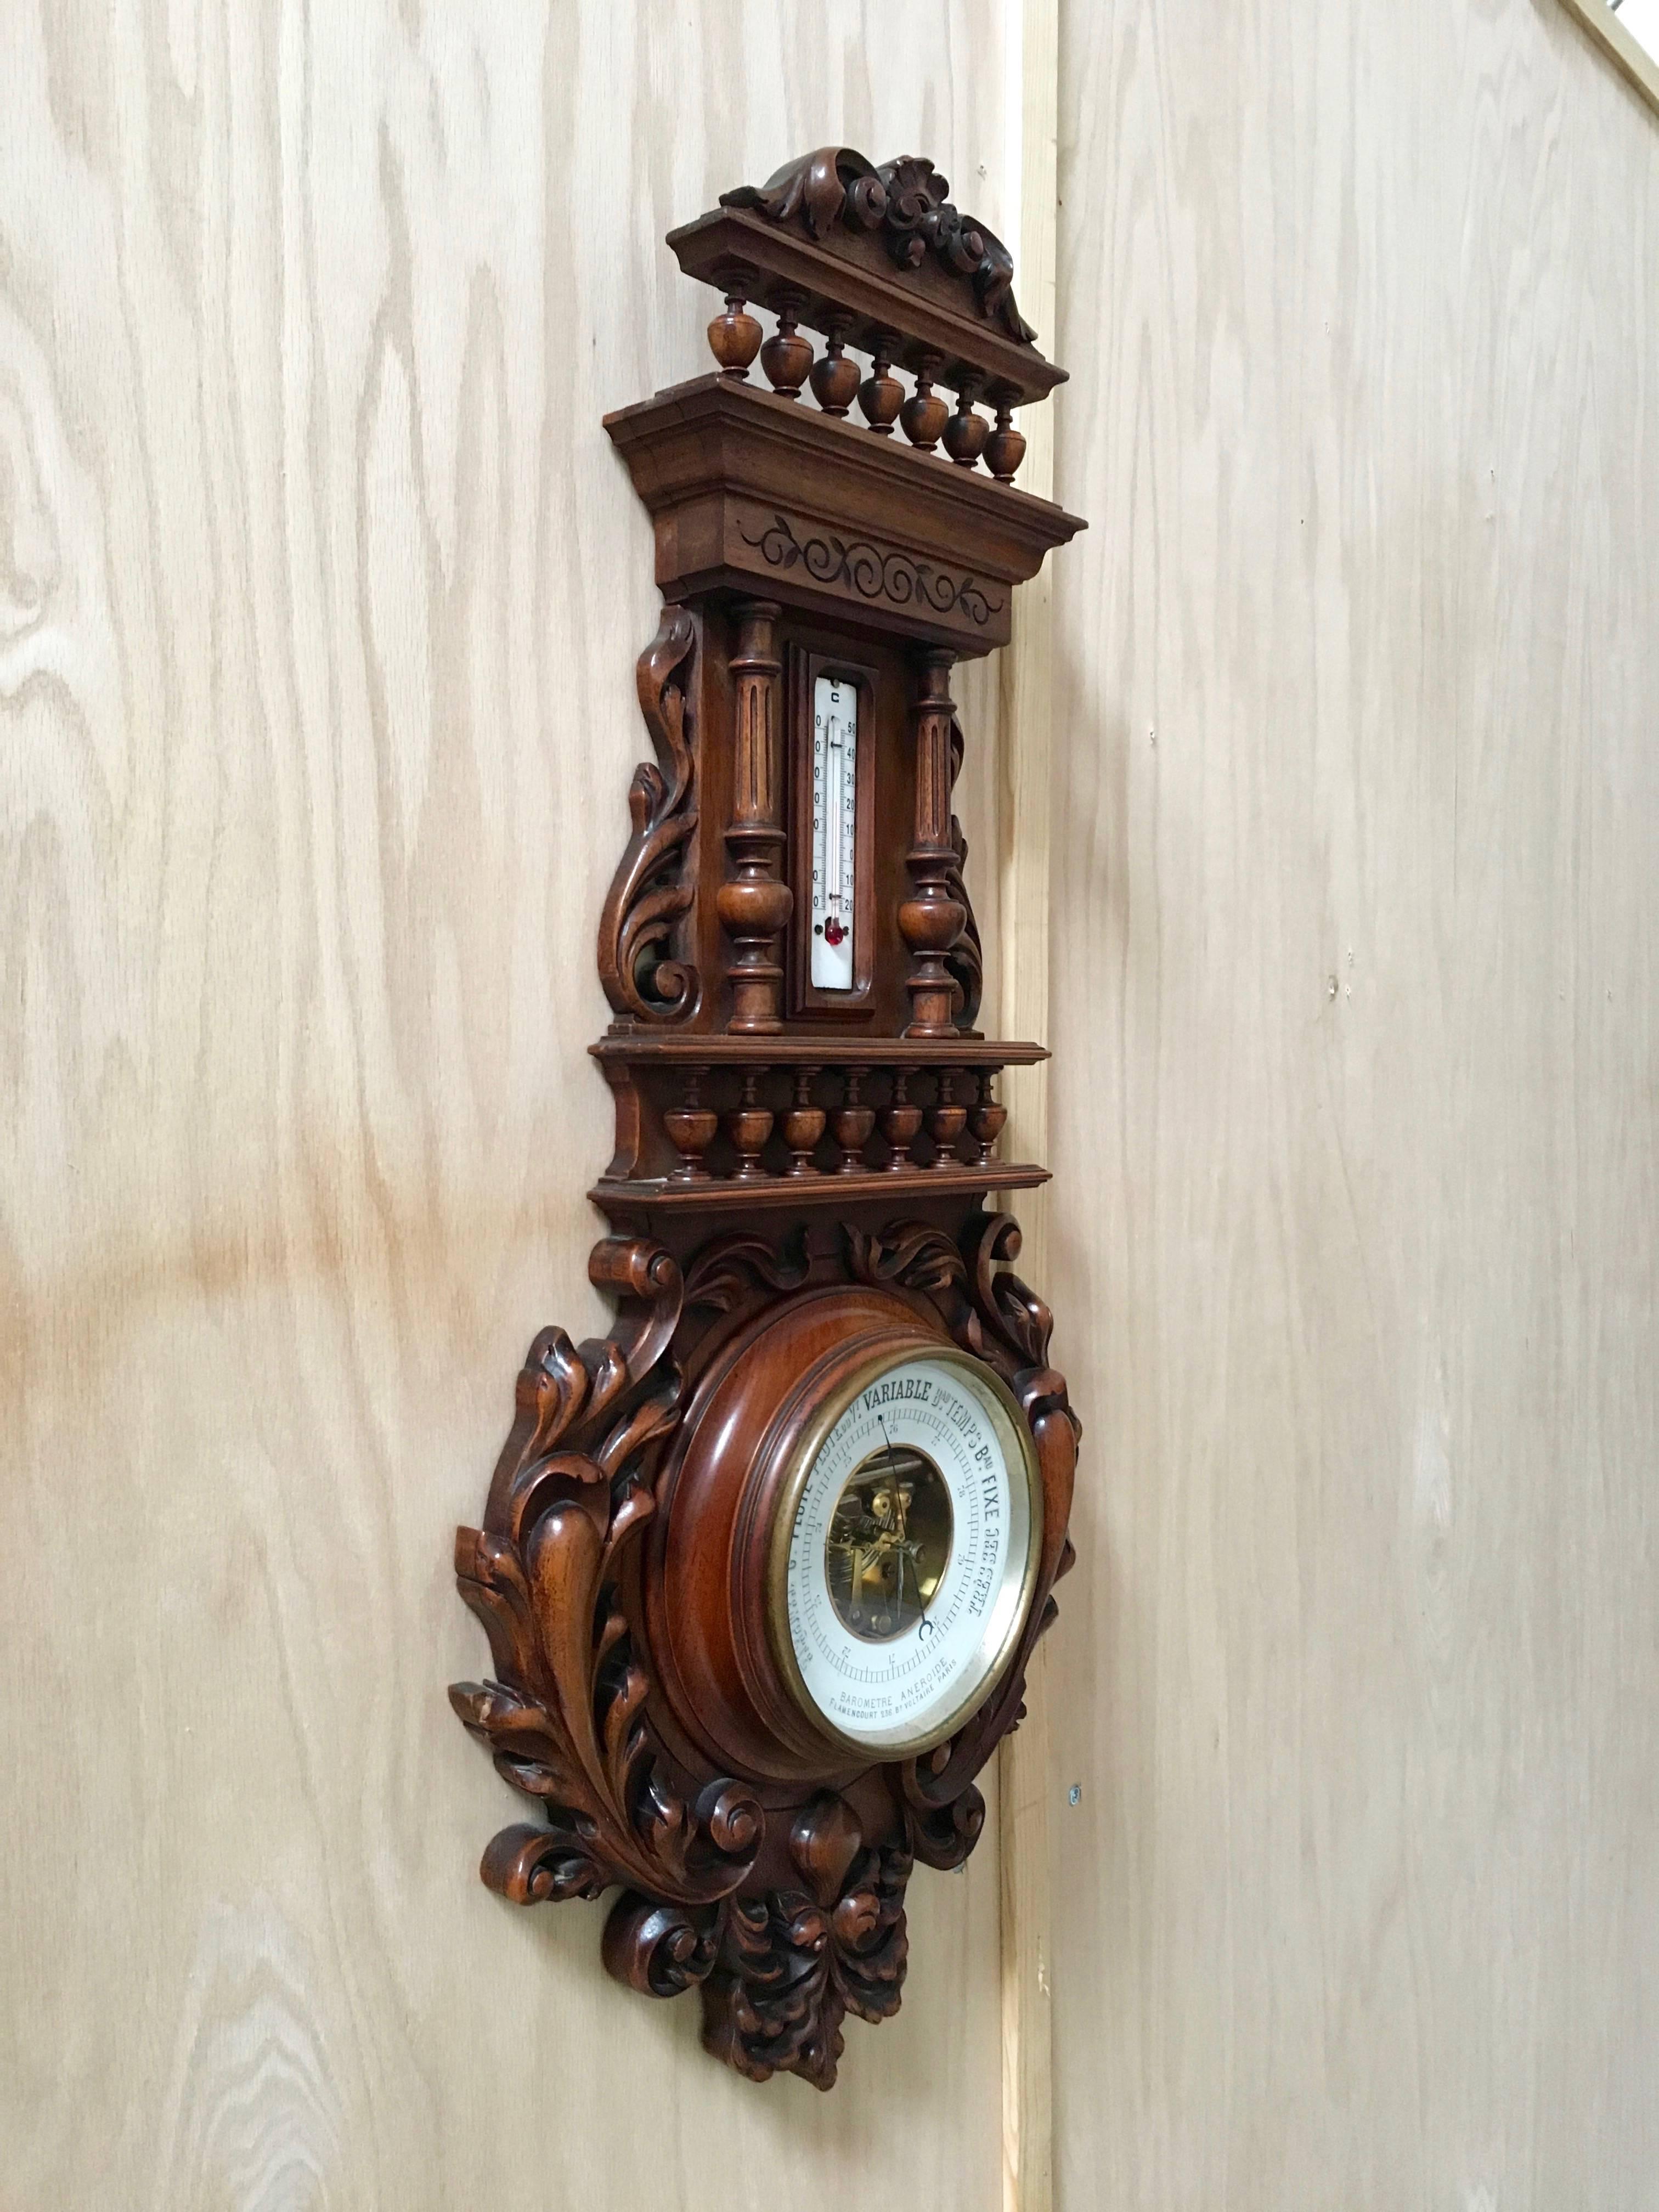 Antique 19th century carved walnut aneroide barometer with thermometer in centigrade.